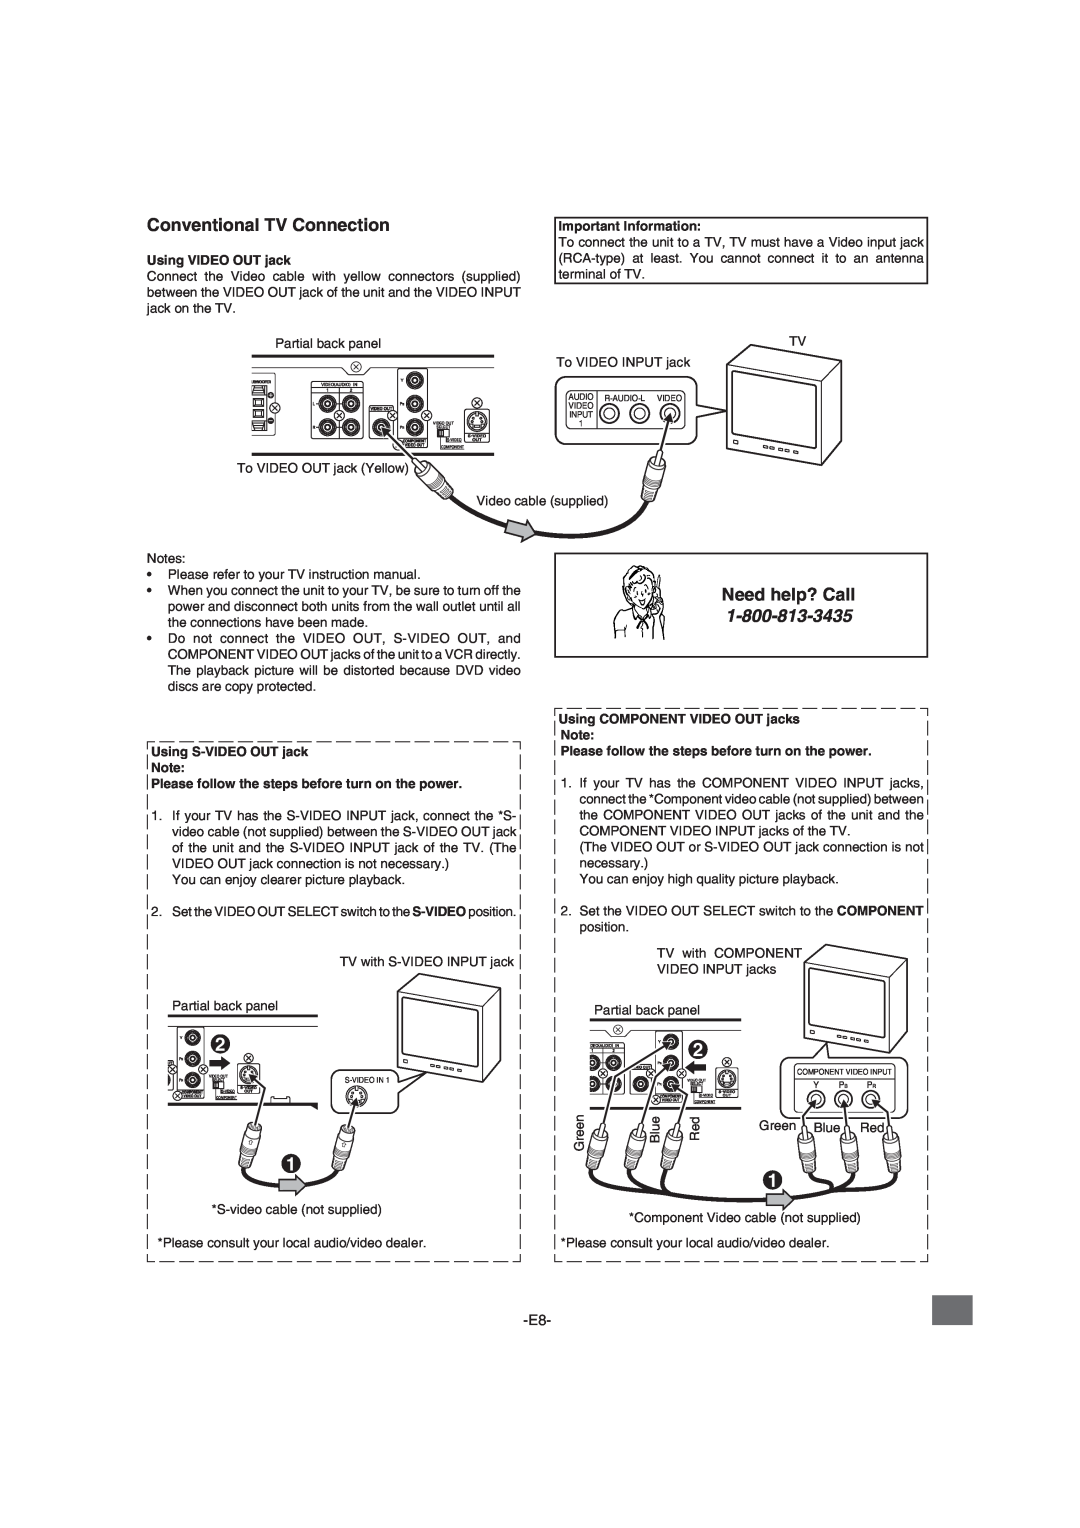 Sanyo DWM-2600 instruction manual Conventional TV Connection, Need help? Call, Using VIDEO OUT jack, Important Information 